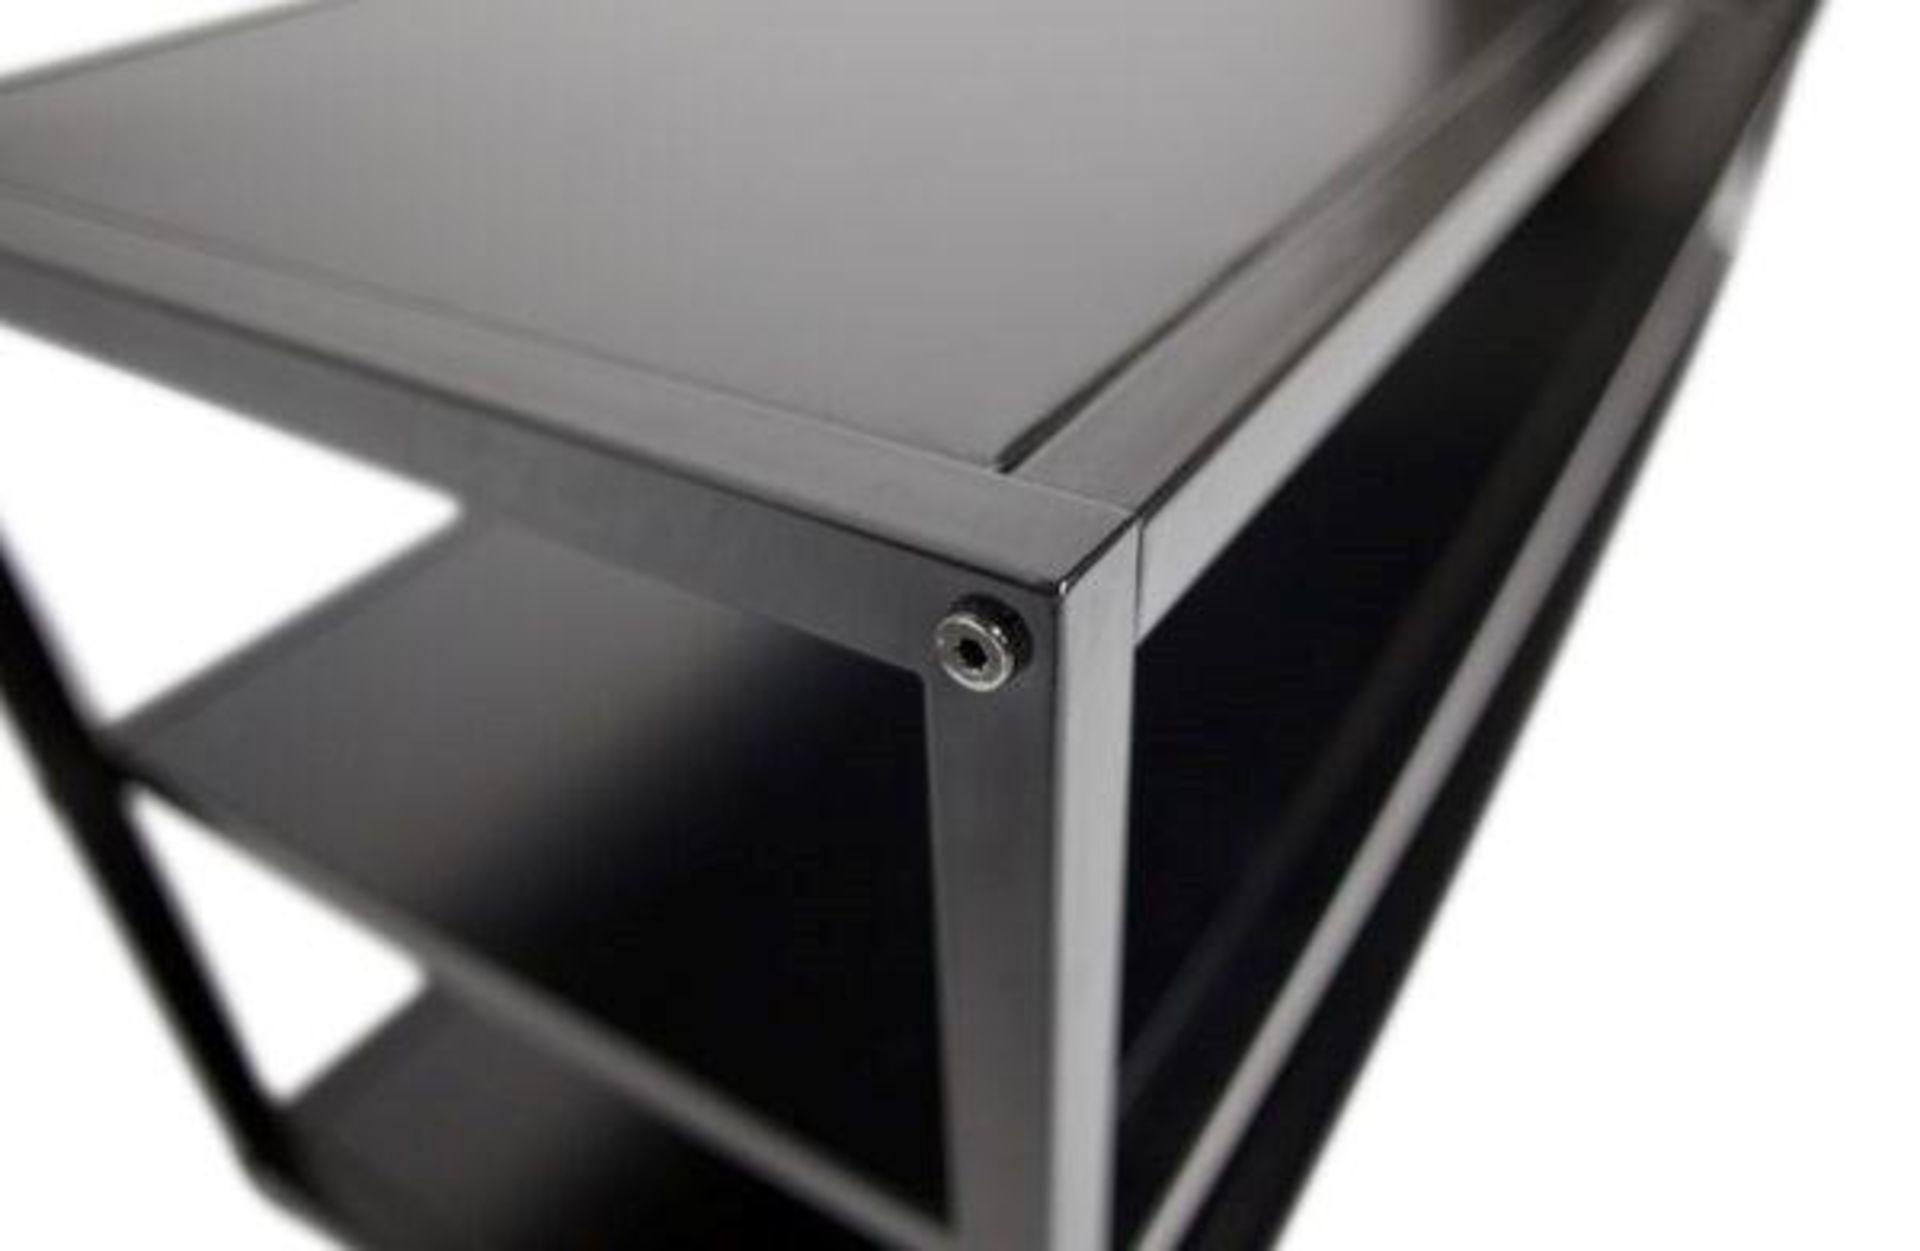 1 x 'Teun' Contemporary Sleek Black Metal TV Unit / Low Side Unit Produced By Woood Designs - Ref: 2 - Image 3 of 4